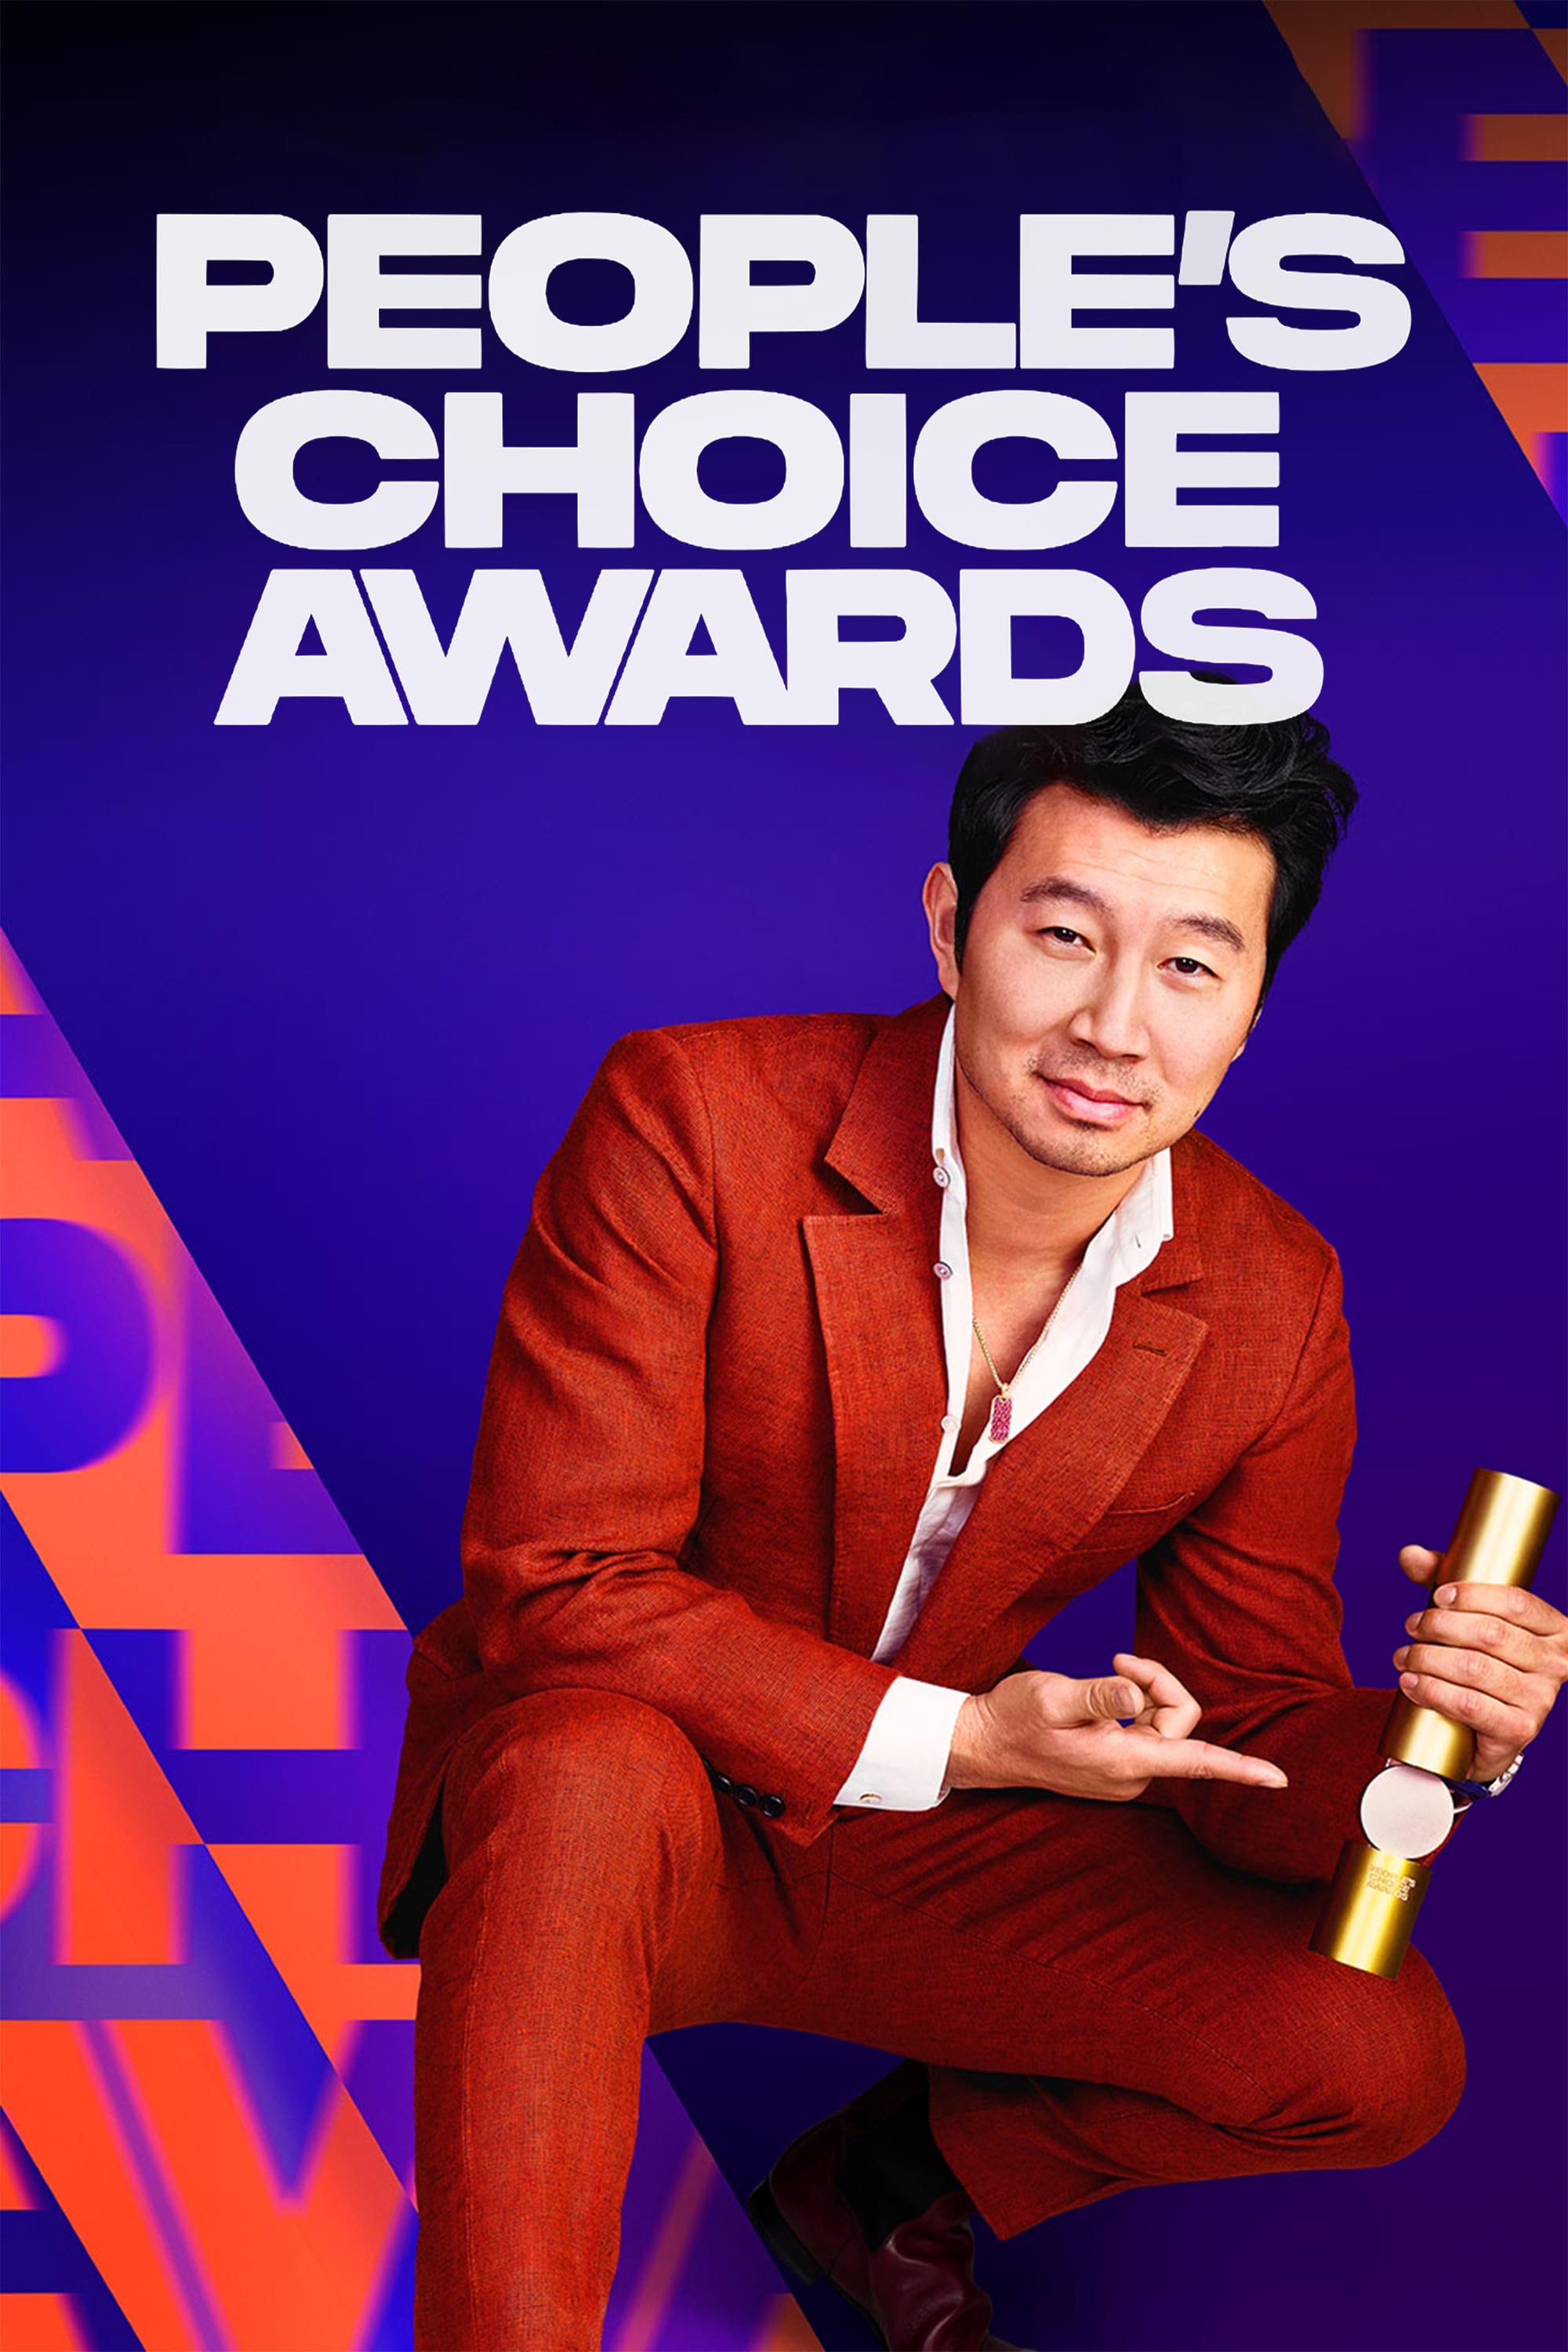 People's Choice Awards poster